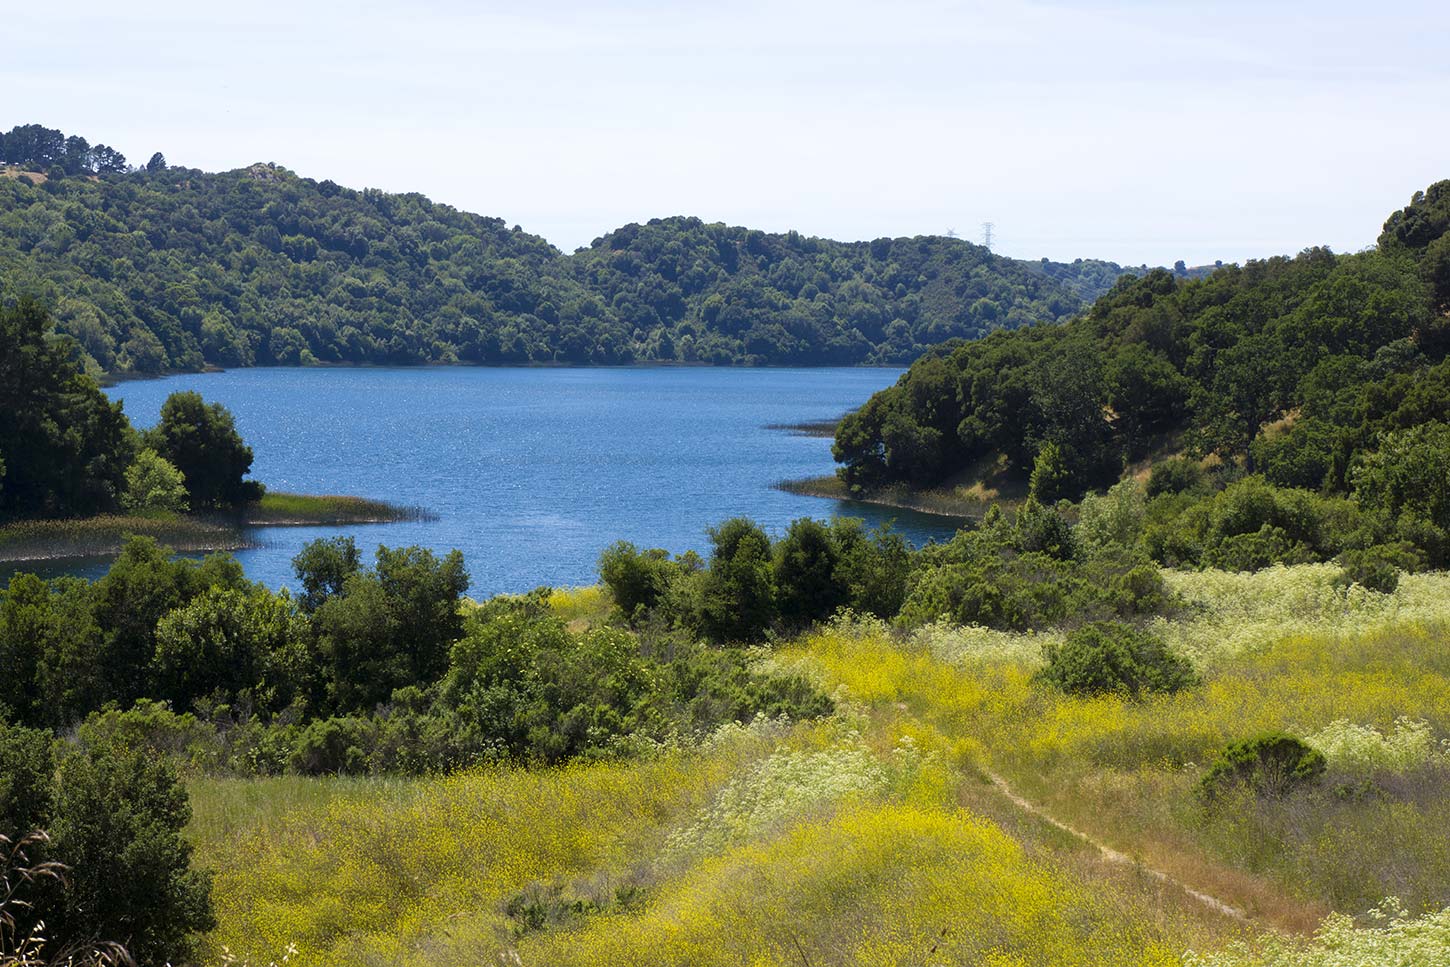 The Oursan Trail and Briones Reservoir